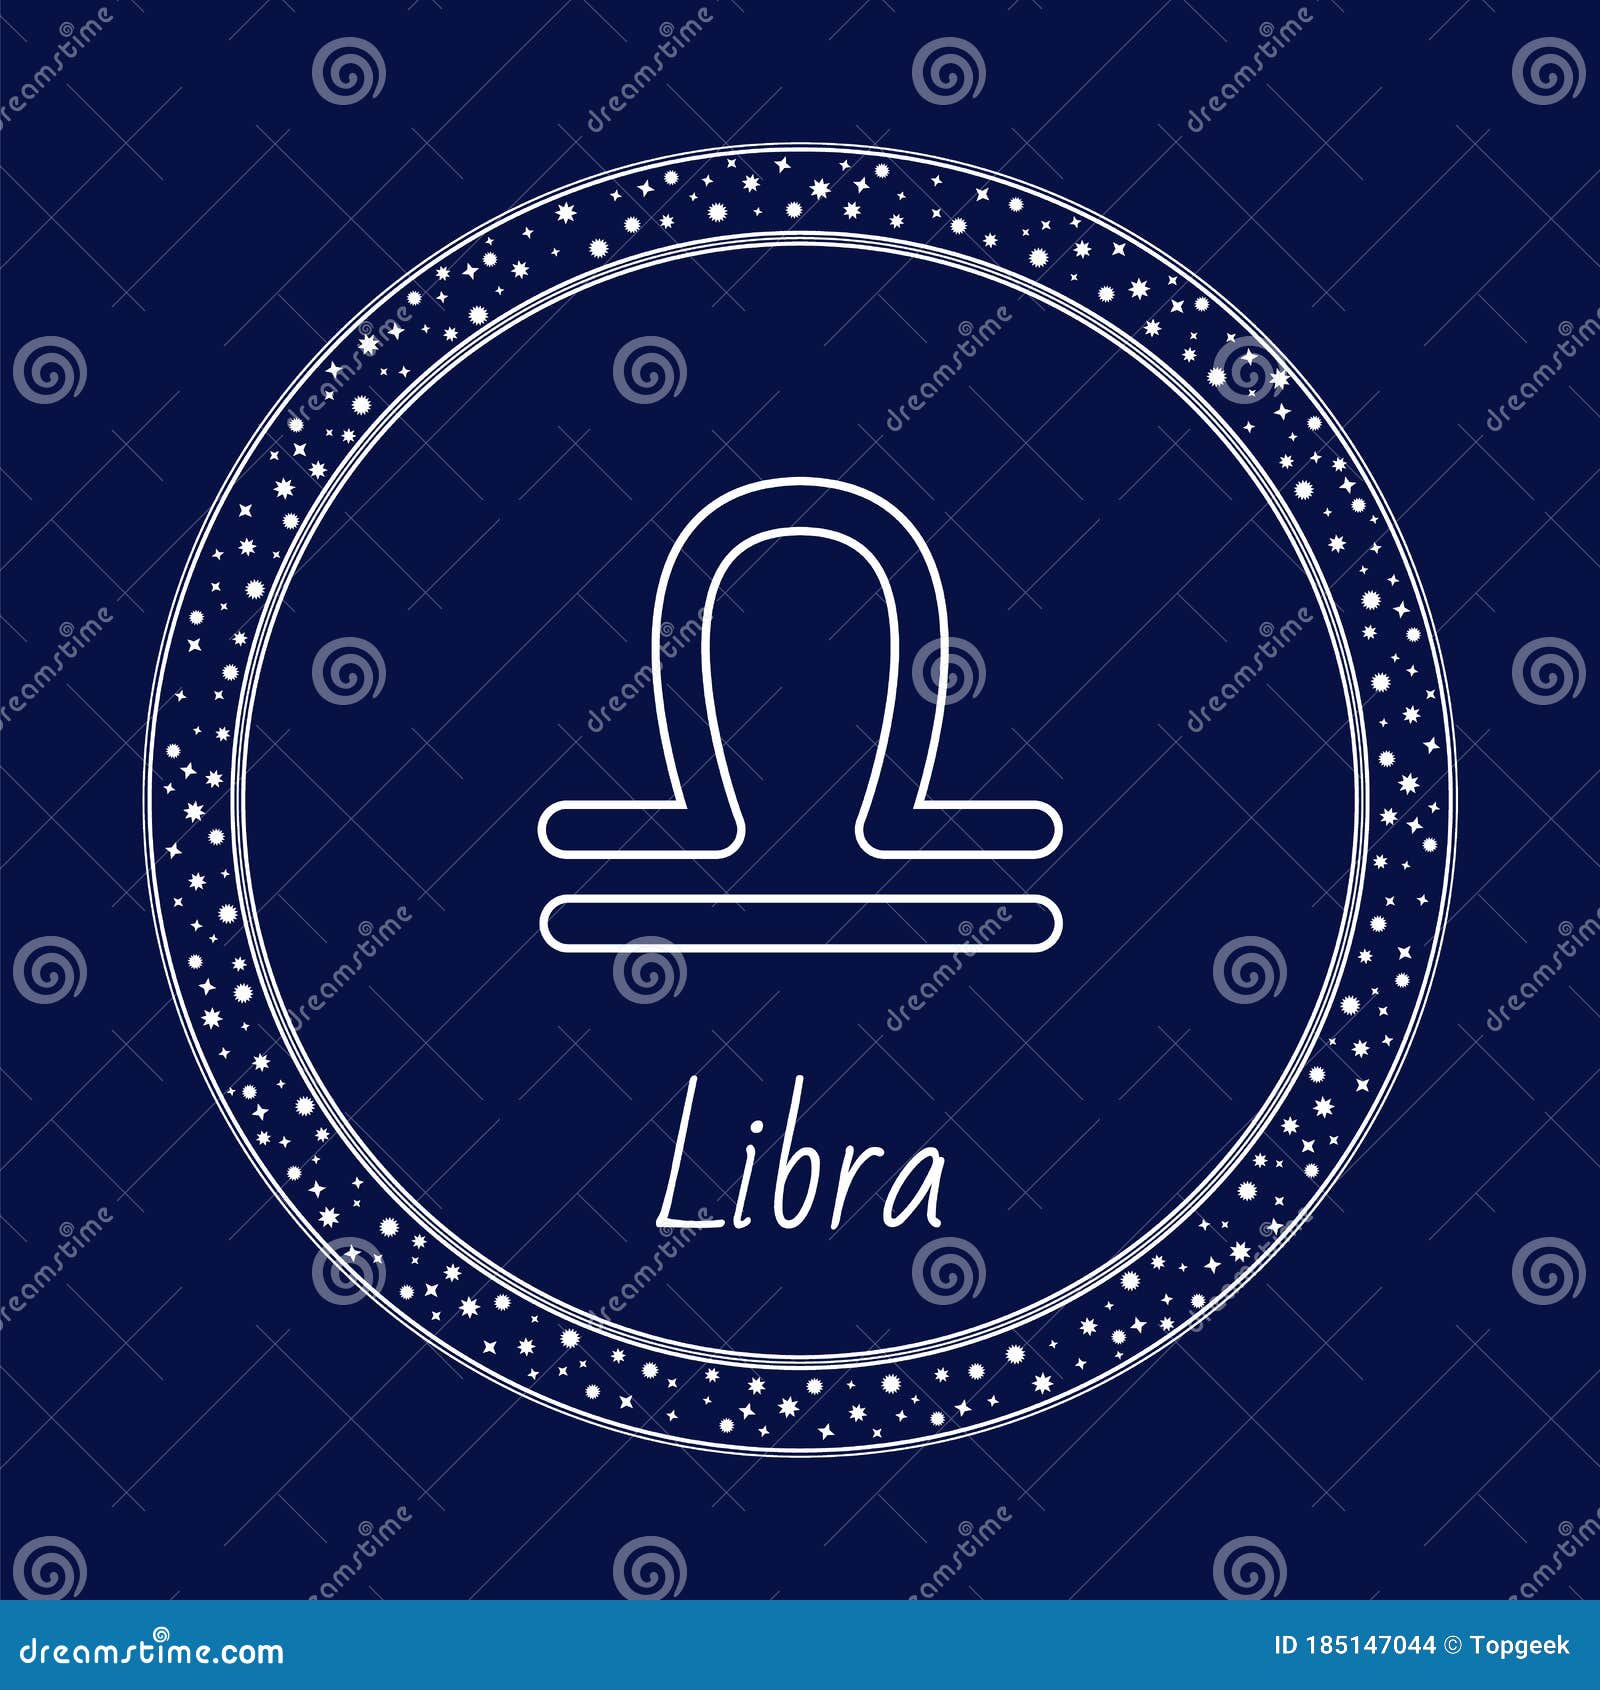 Libra Constellation Zodiac Astrology Sign Isolated Stock Vector ...